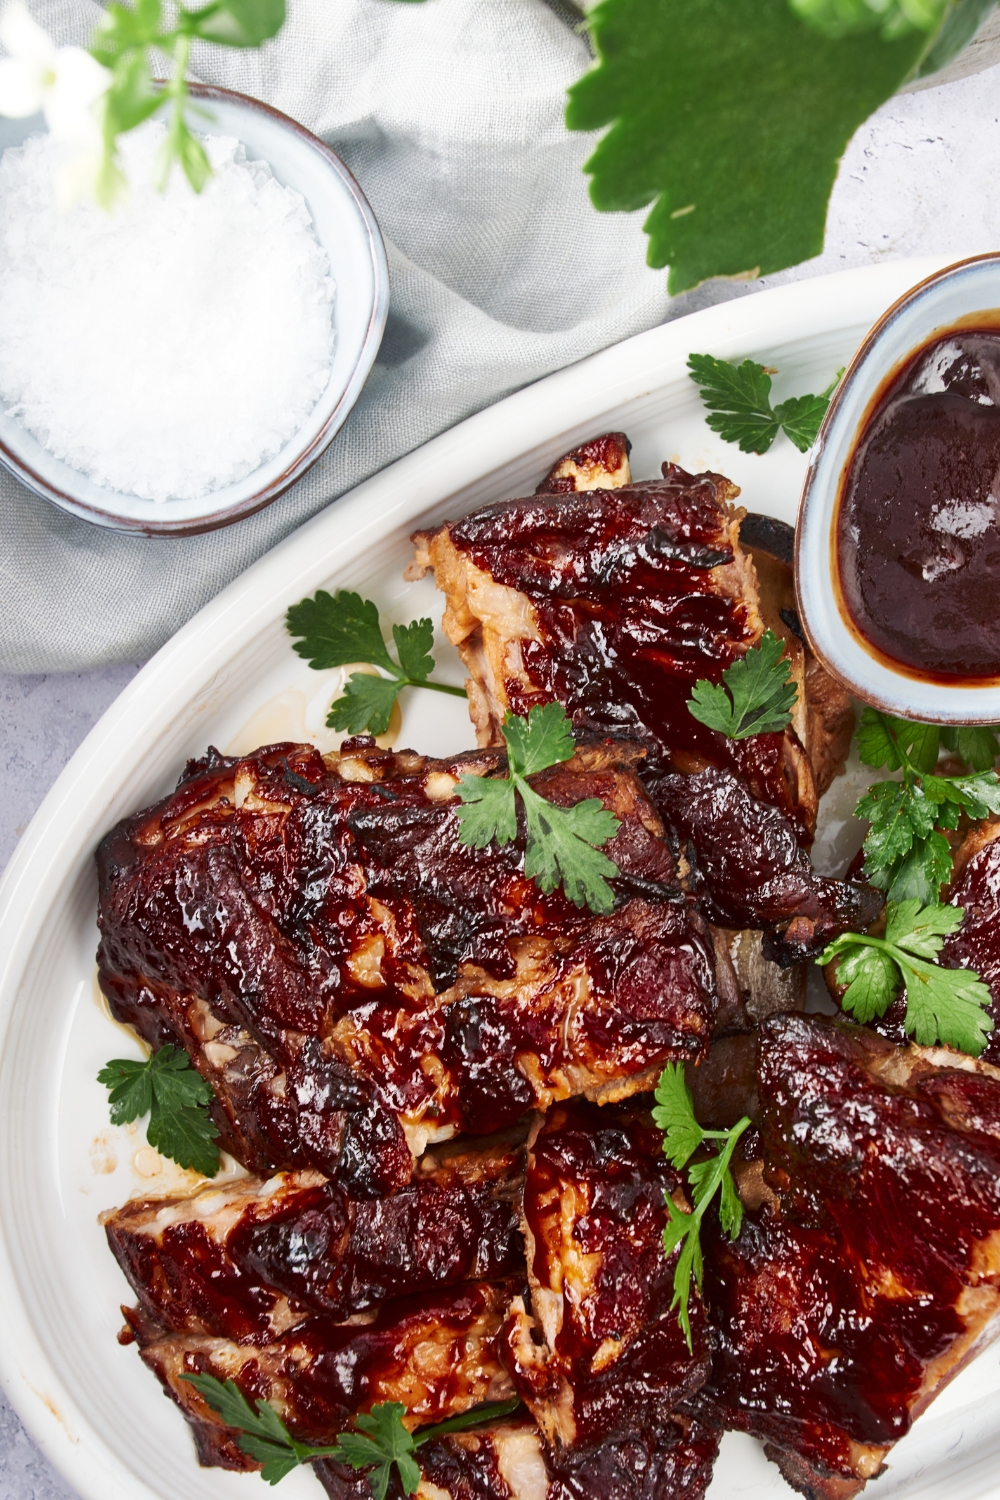 Overhead view of cooked ribs covered in barbecue sauce piled on top of each other on a white plate, with a side of barbecue sauce on the plate and fresh parsley garnished on top of the ribs.